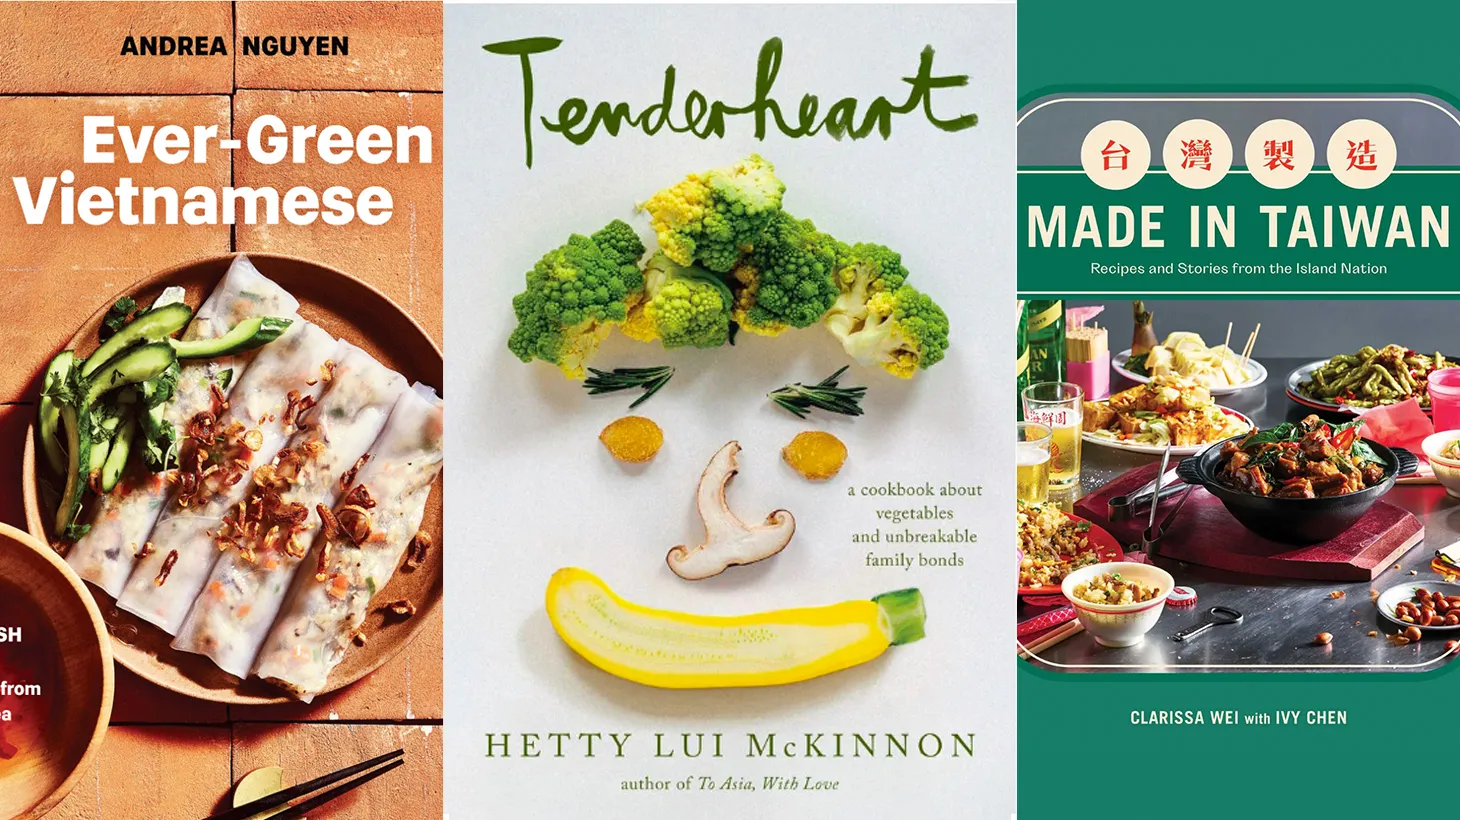 Consider “Ever-Green Vietnamese: Super-Fresh Recipes, Starring Plants from Land and Sea,” “Made in Taiwan: Recipes and Stories from the Island Nation,” and “Tenderheart: A Cookbook About Vegetables and Unbreakable Family Bonds” for APPI Heritage Month.